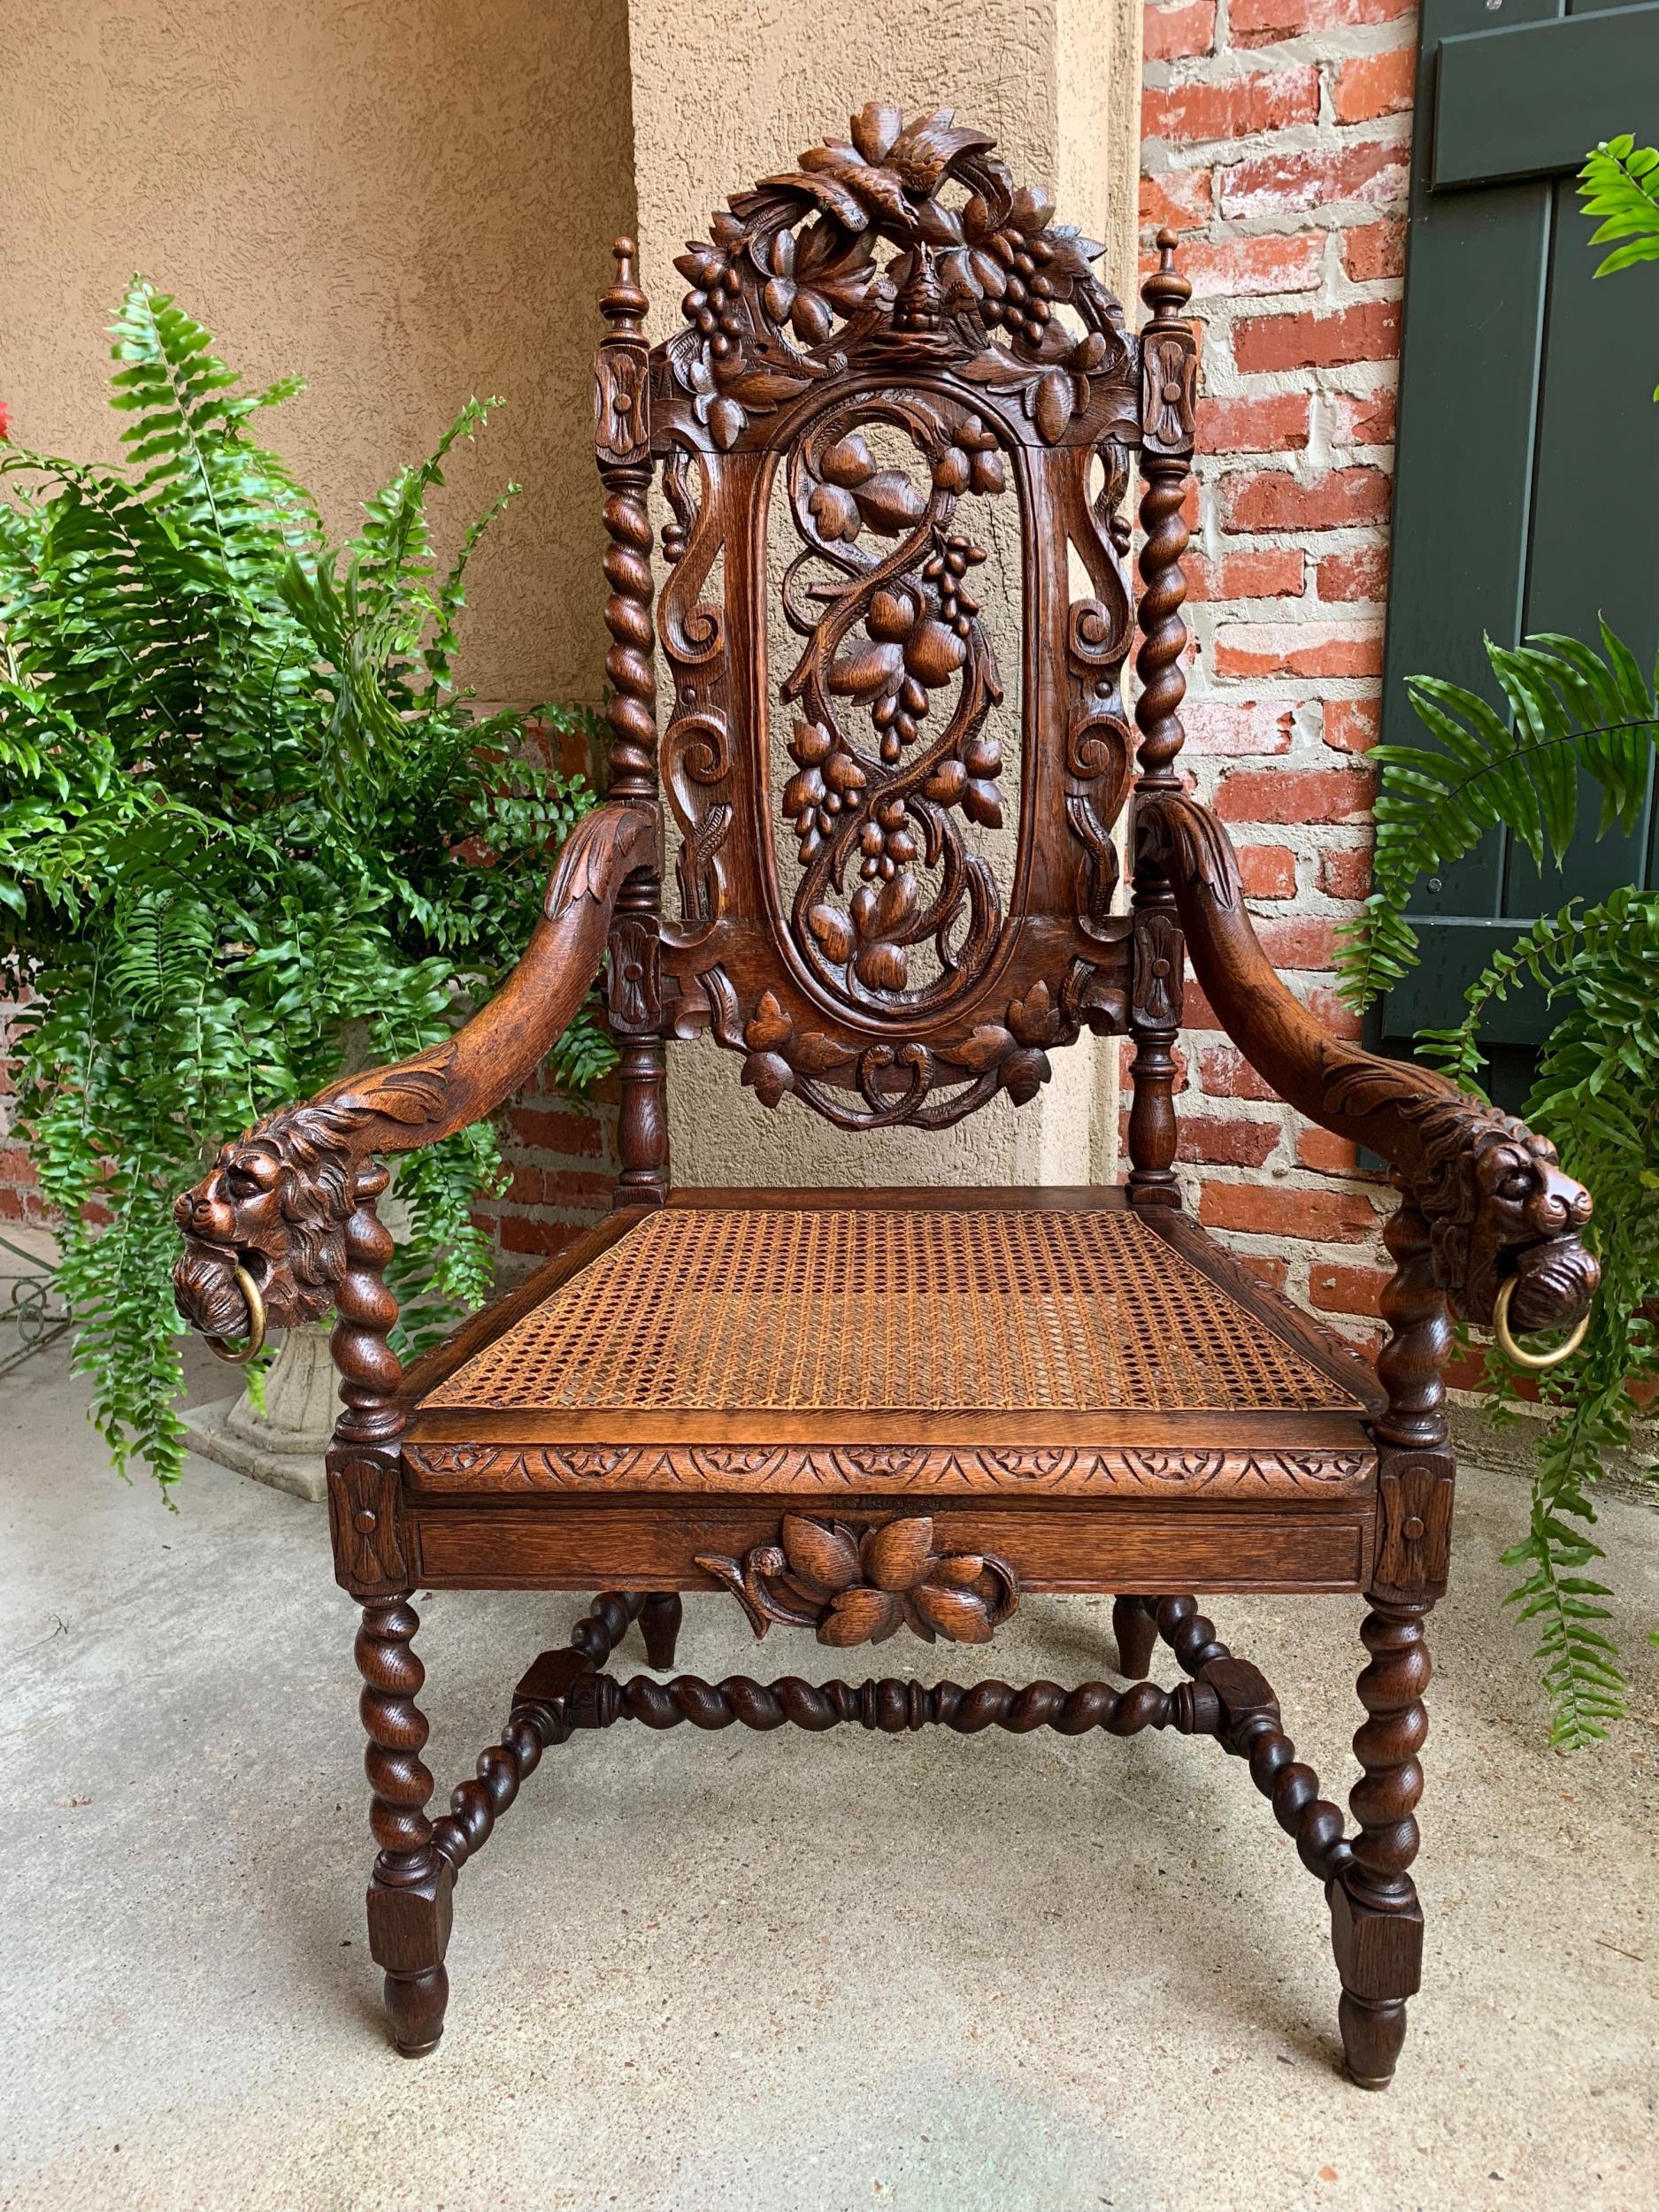 Antique French Carved Oak Throne Arm Chair Barley Twist Renaissance Louis XIII

~Direct from France~
~Large antique French carved oak “throne” arm chair, with stunning carved features~
~High carved upper crown features a dimensional carved